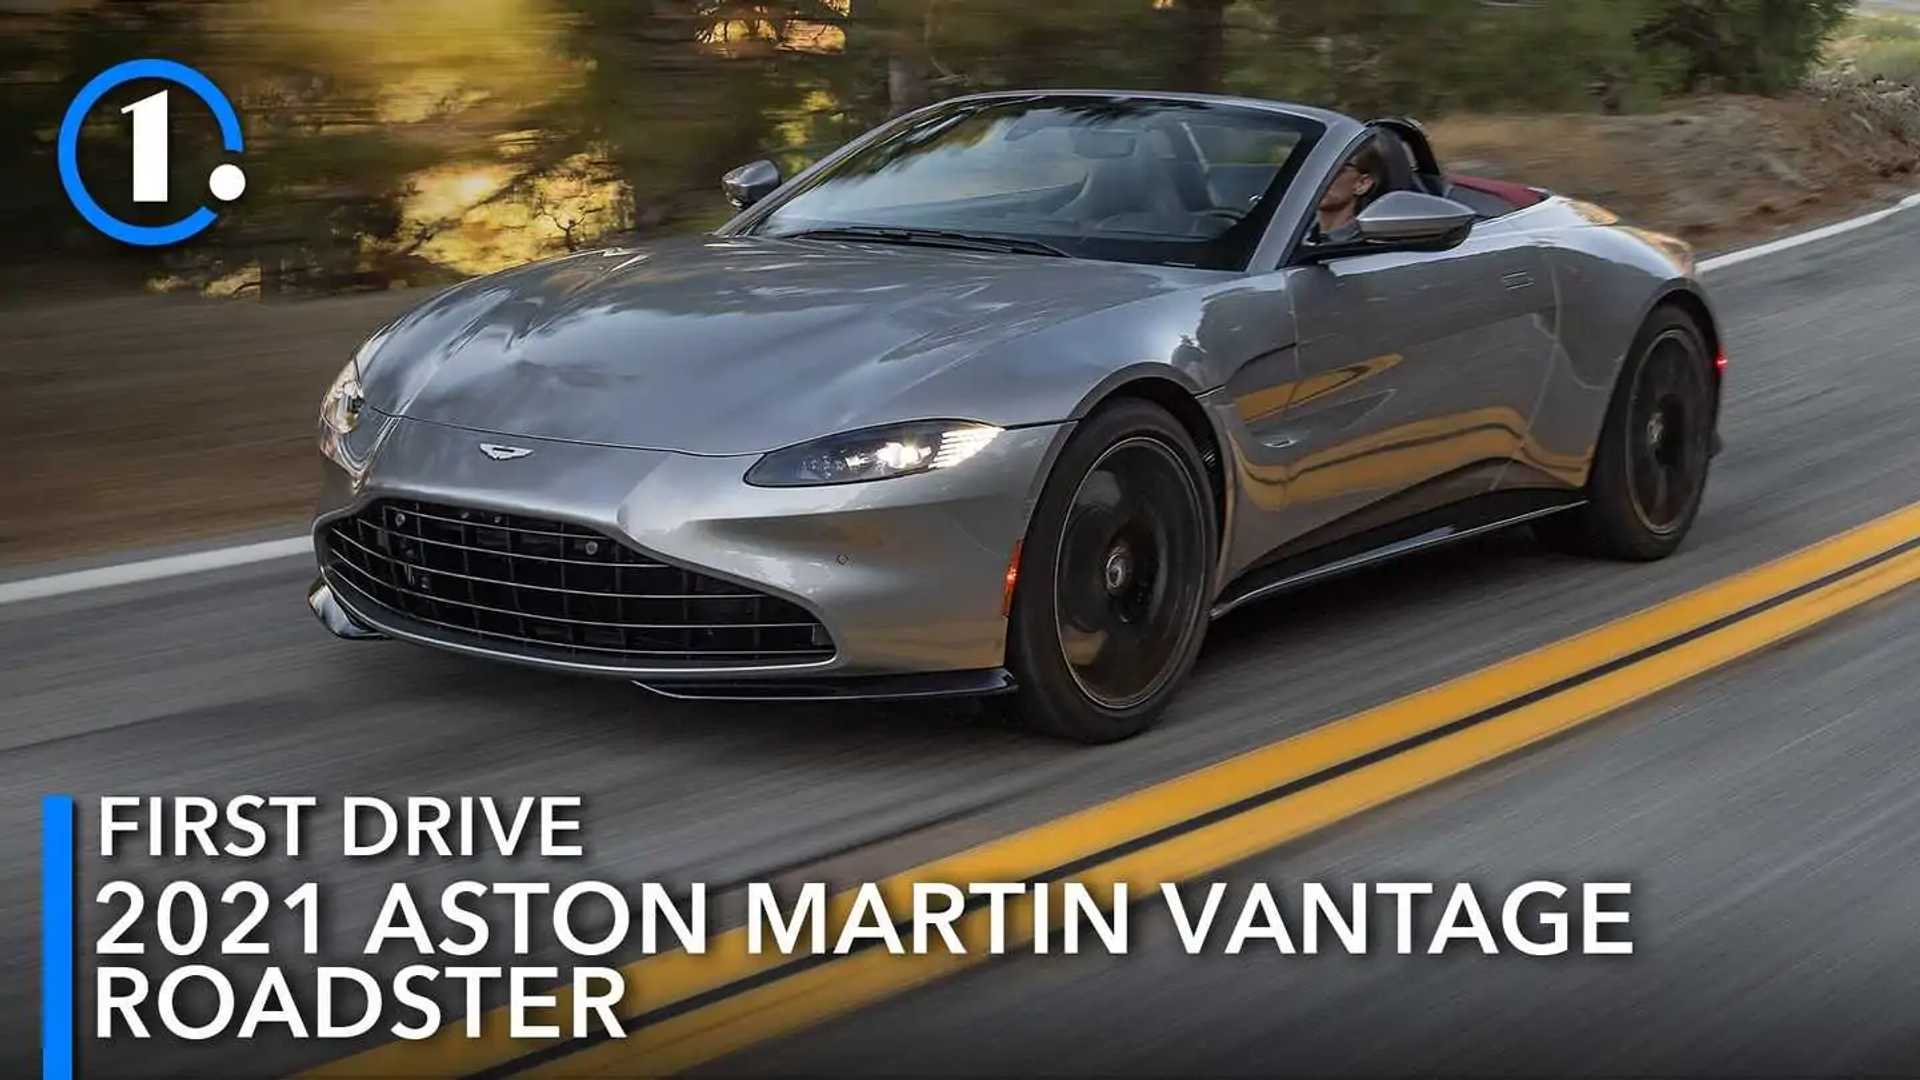 2021 Aston Martin Vantage Roadster First Drive Review: Icy Cool